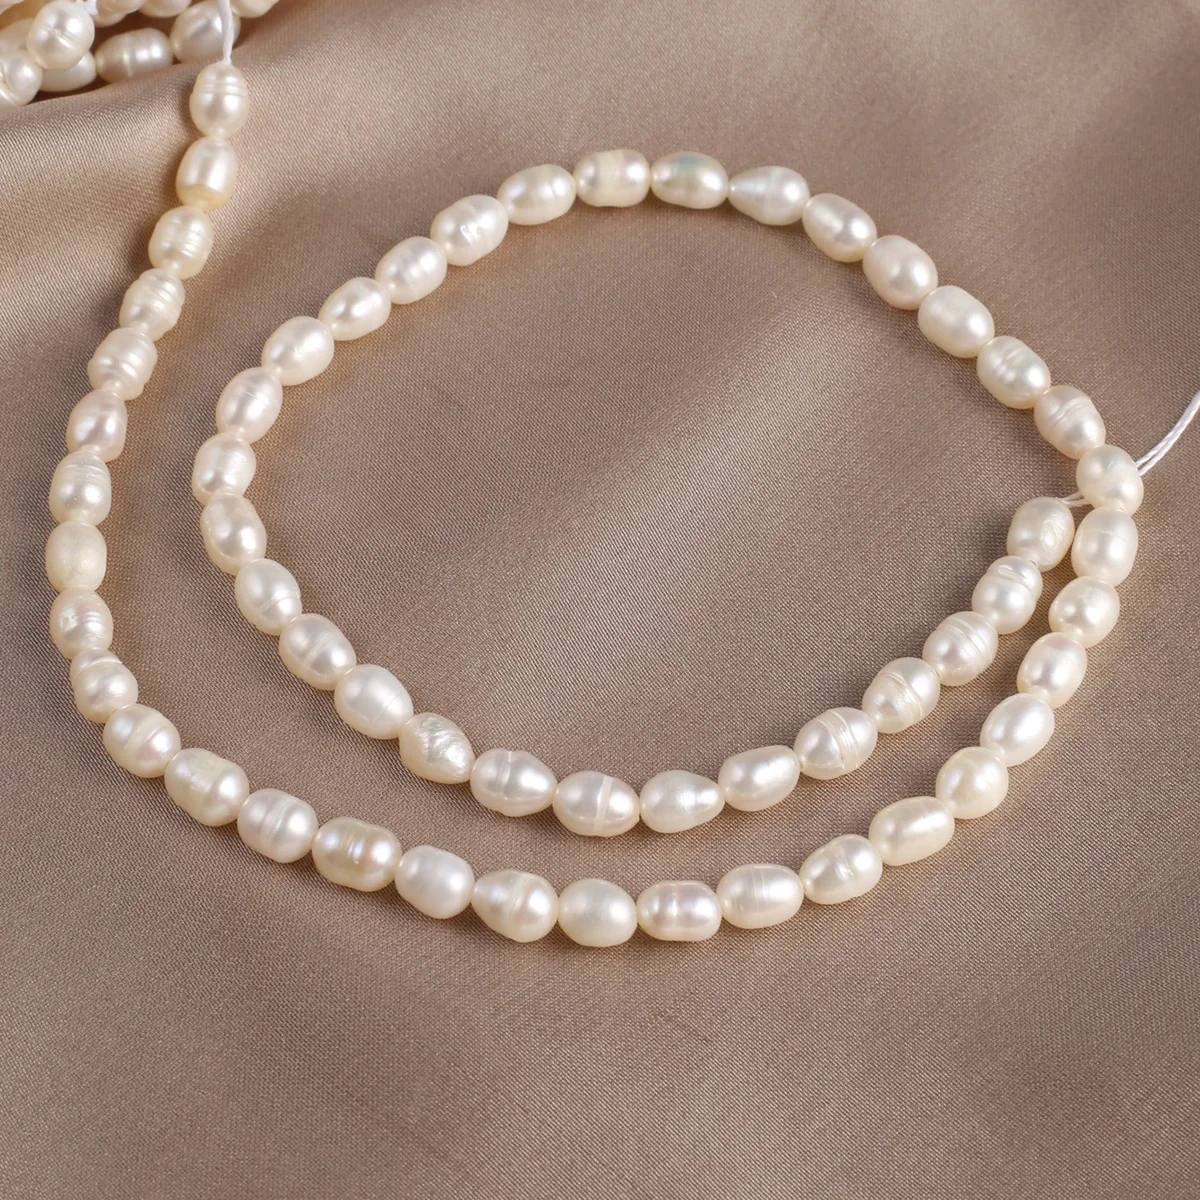 

Natural Zhuji Freshwater Cultured Pearls Beads Loose Punch Pearl Bead for Jewelry Making Diy Necklace Bracelet Accessories